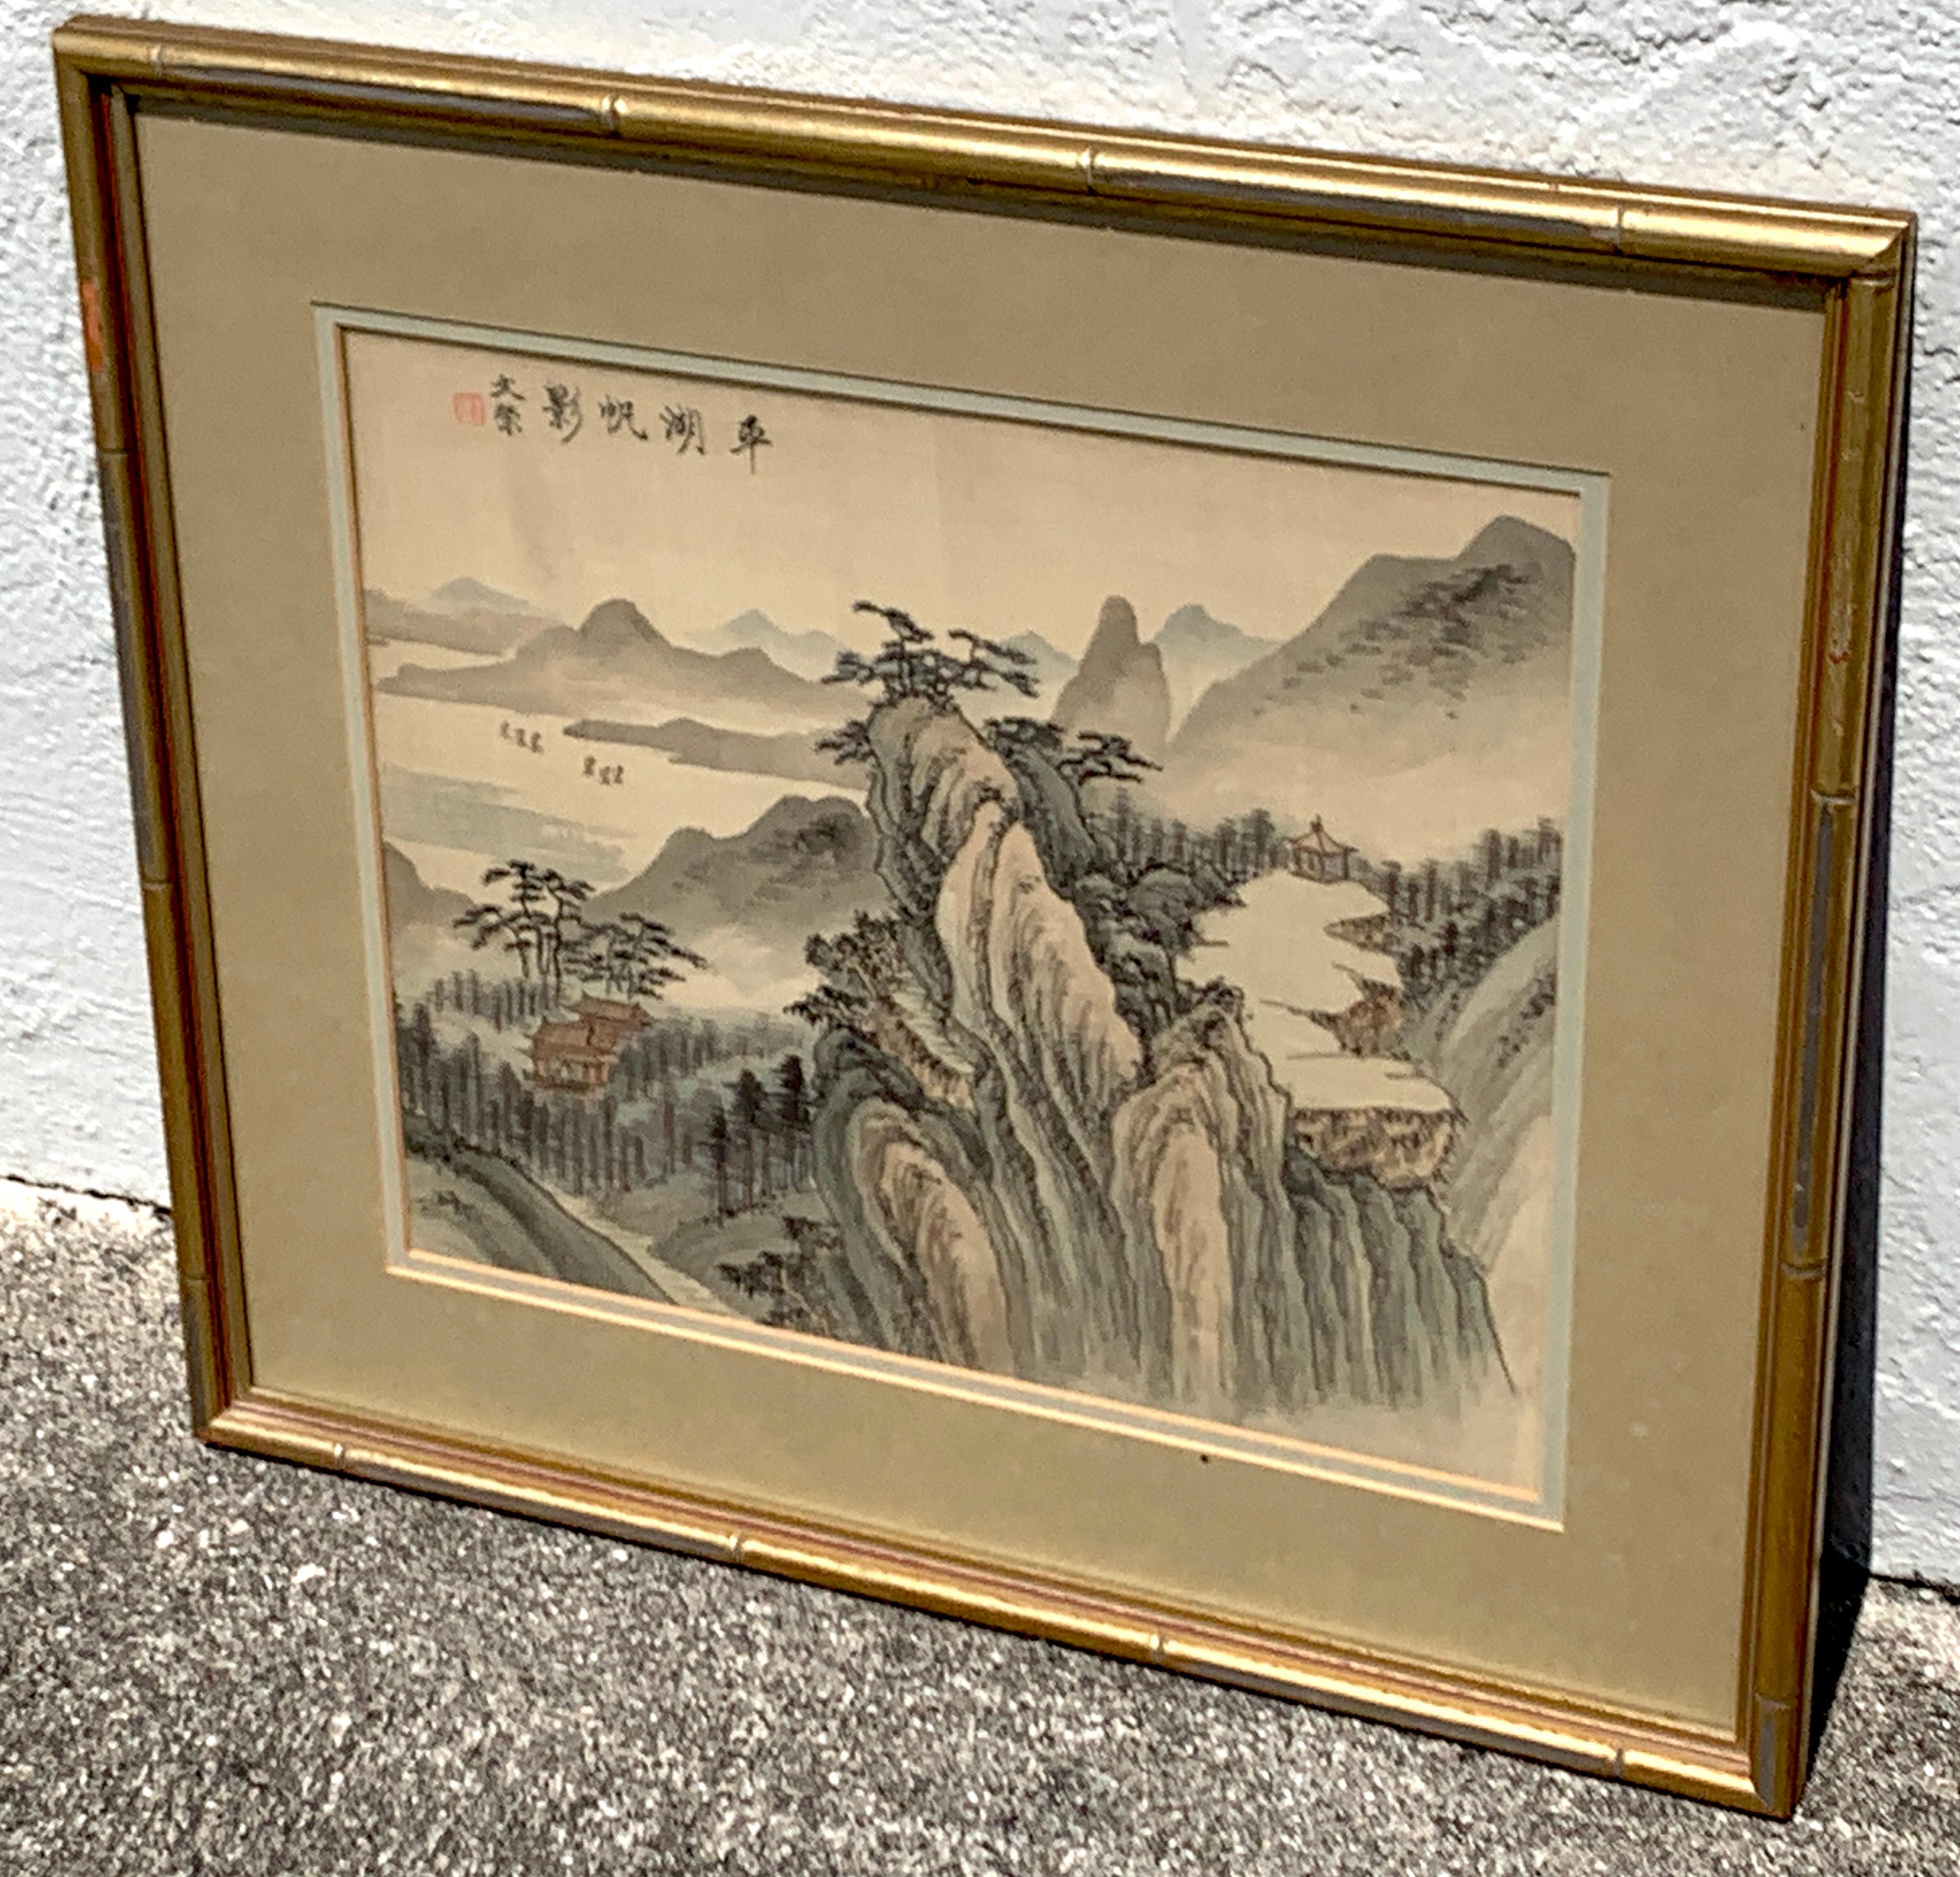 Midcentury Chinese Export Landscape Painting on Silk, White Mat 2